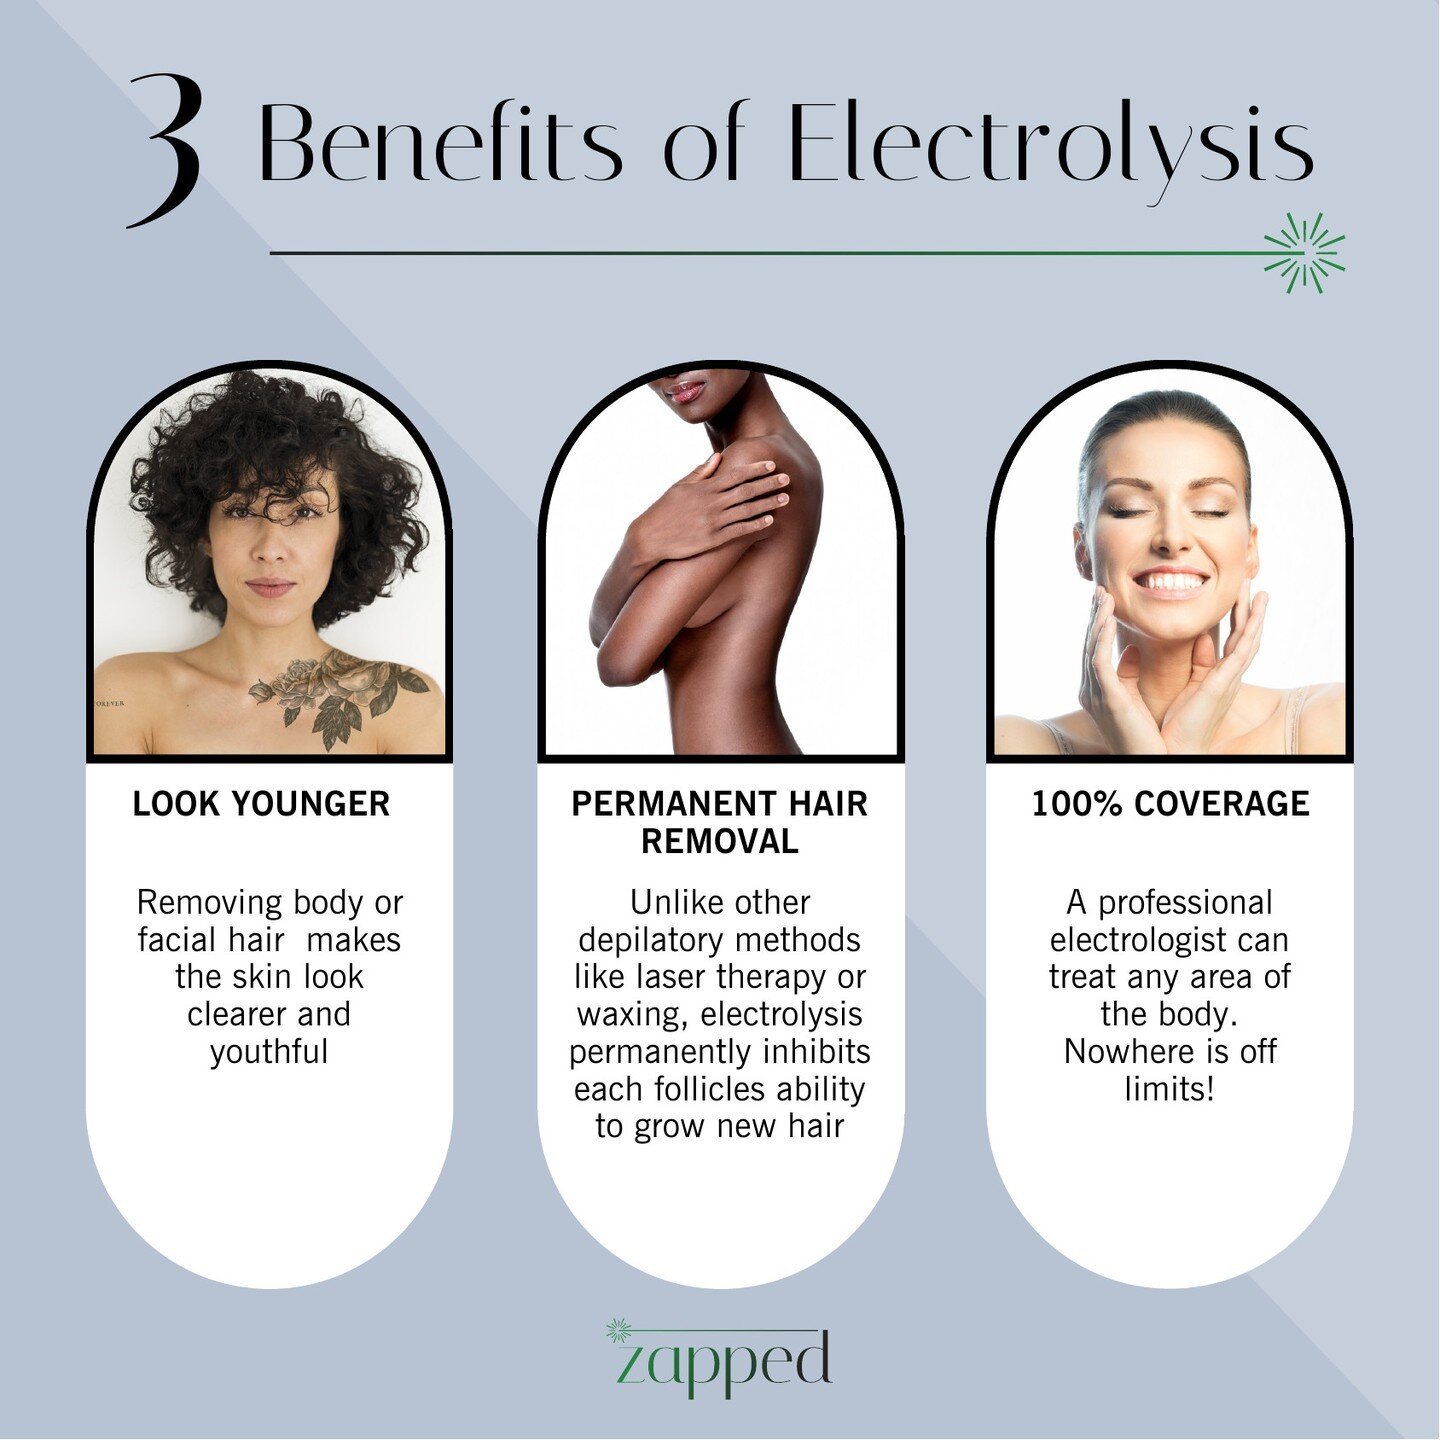 Did you know? 💭 Electrolyis has more benefits than just permanent hair removal! 😌

Link in bio to book an appointment to speak with our #electrolysis experts! 
✳️ (718)-689-5565

#igotzapped #zappedbeauty #laserclinicbrooklyn #skinclinicbrooklyn #b